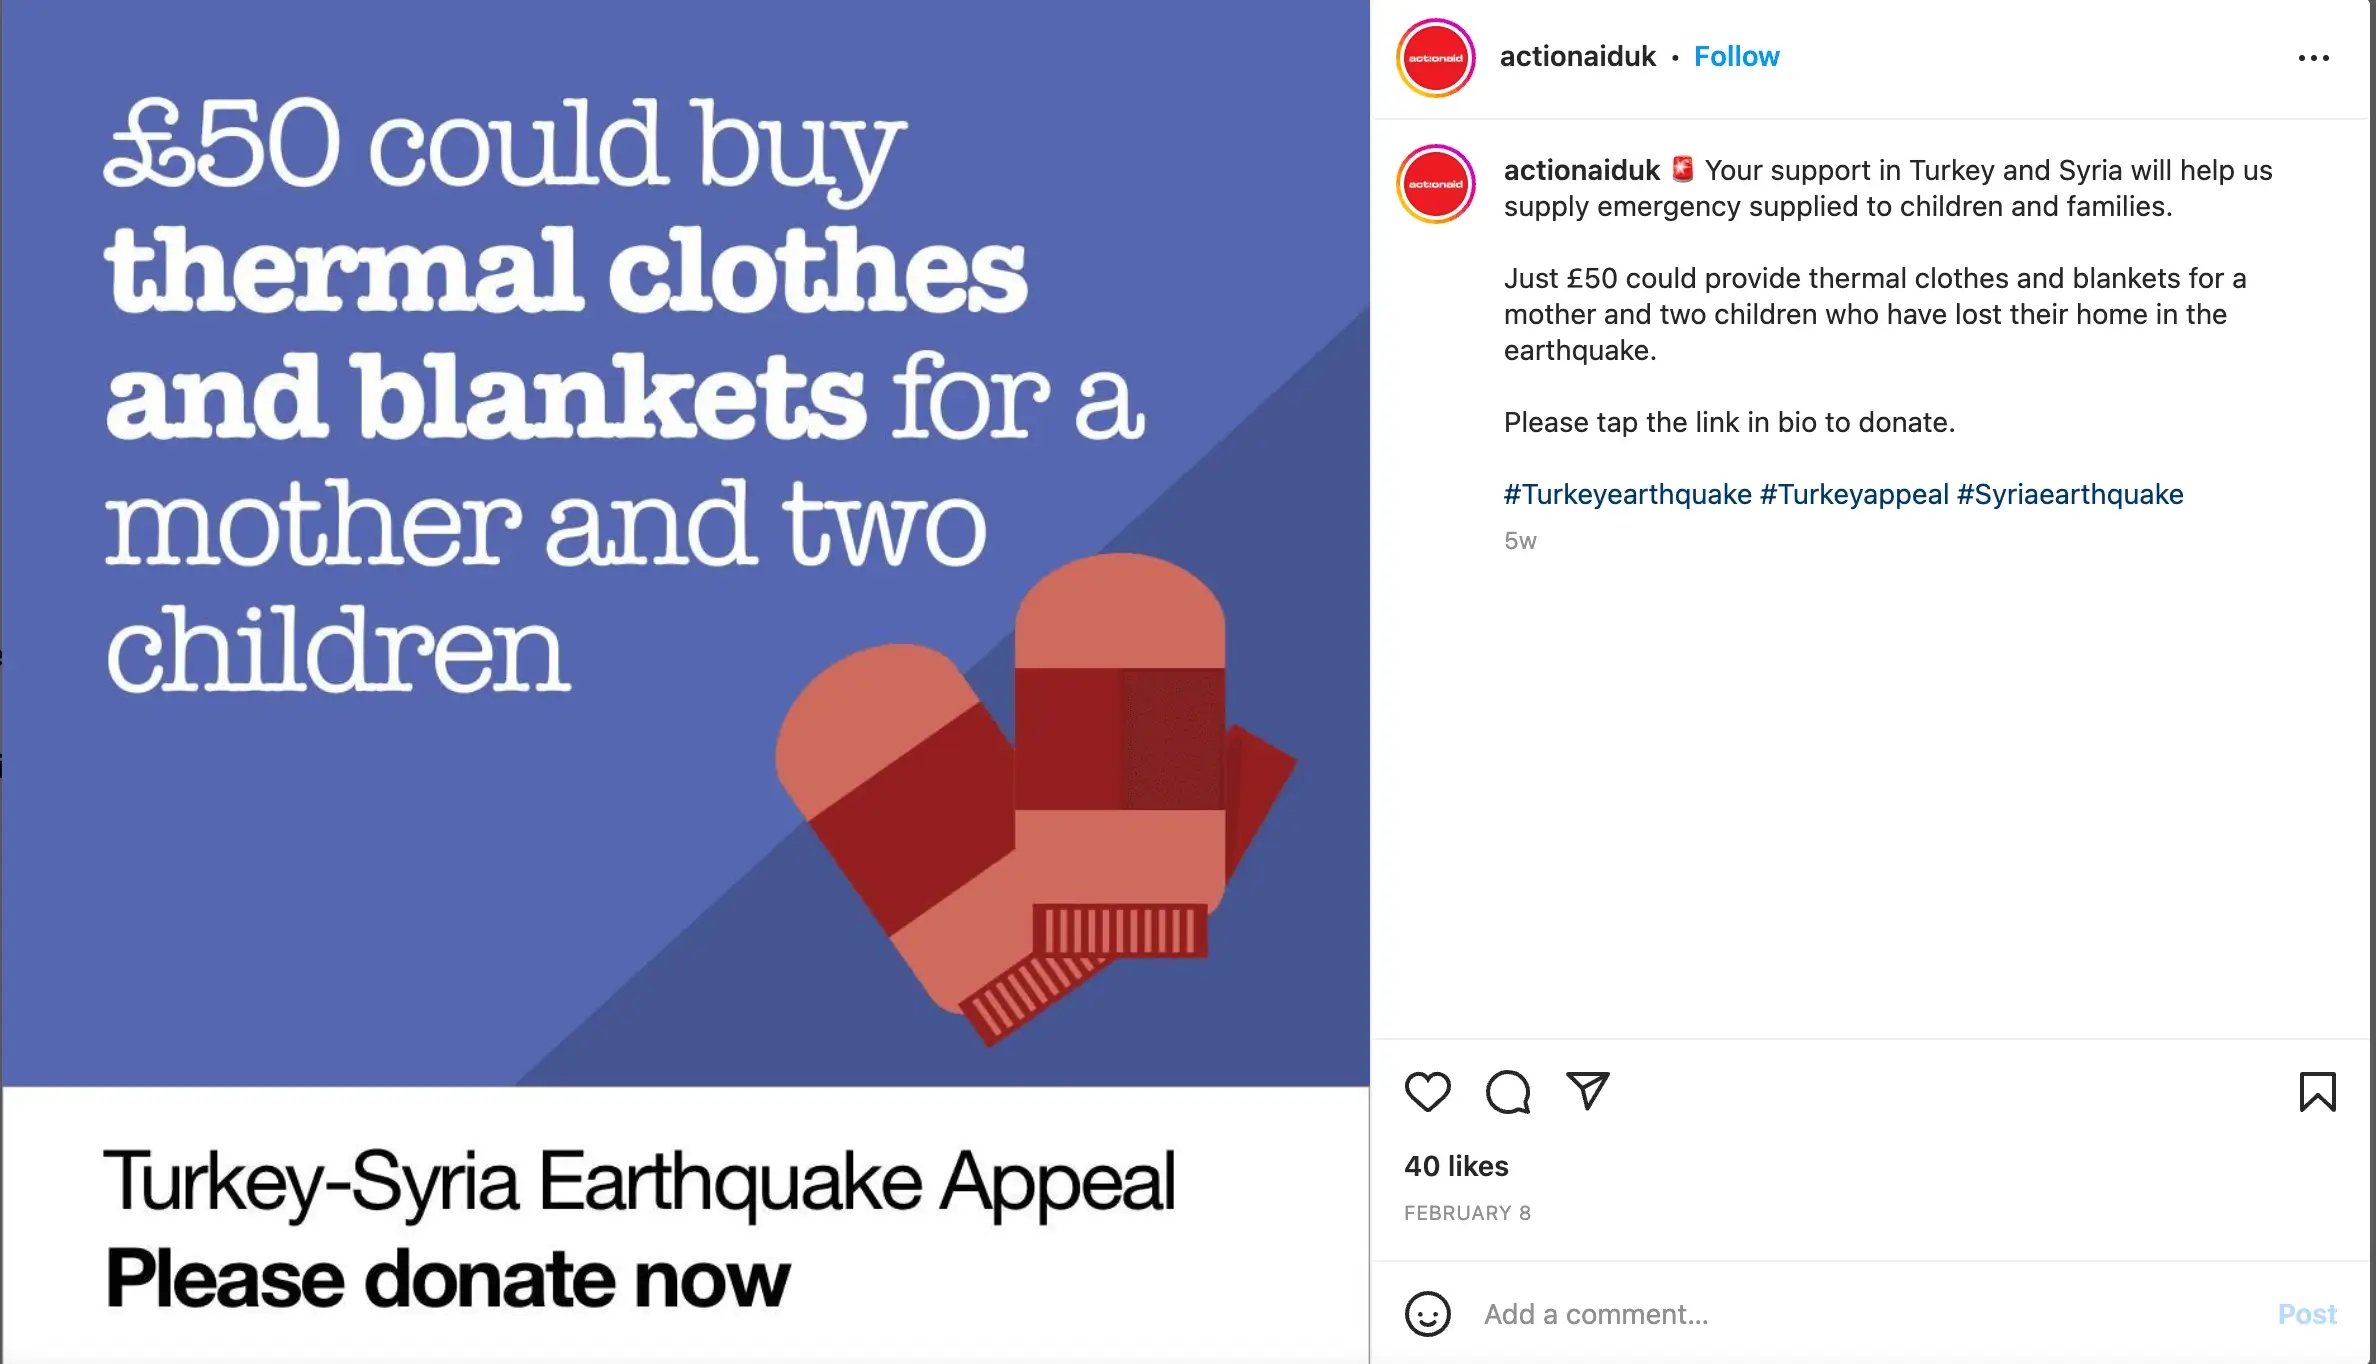 example of social media posts by a charity